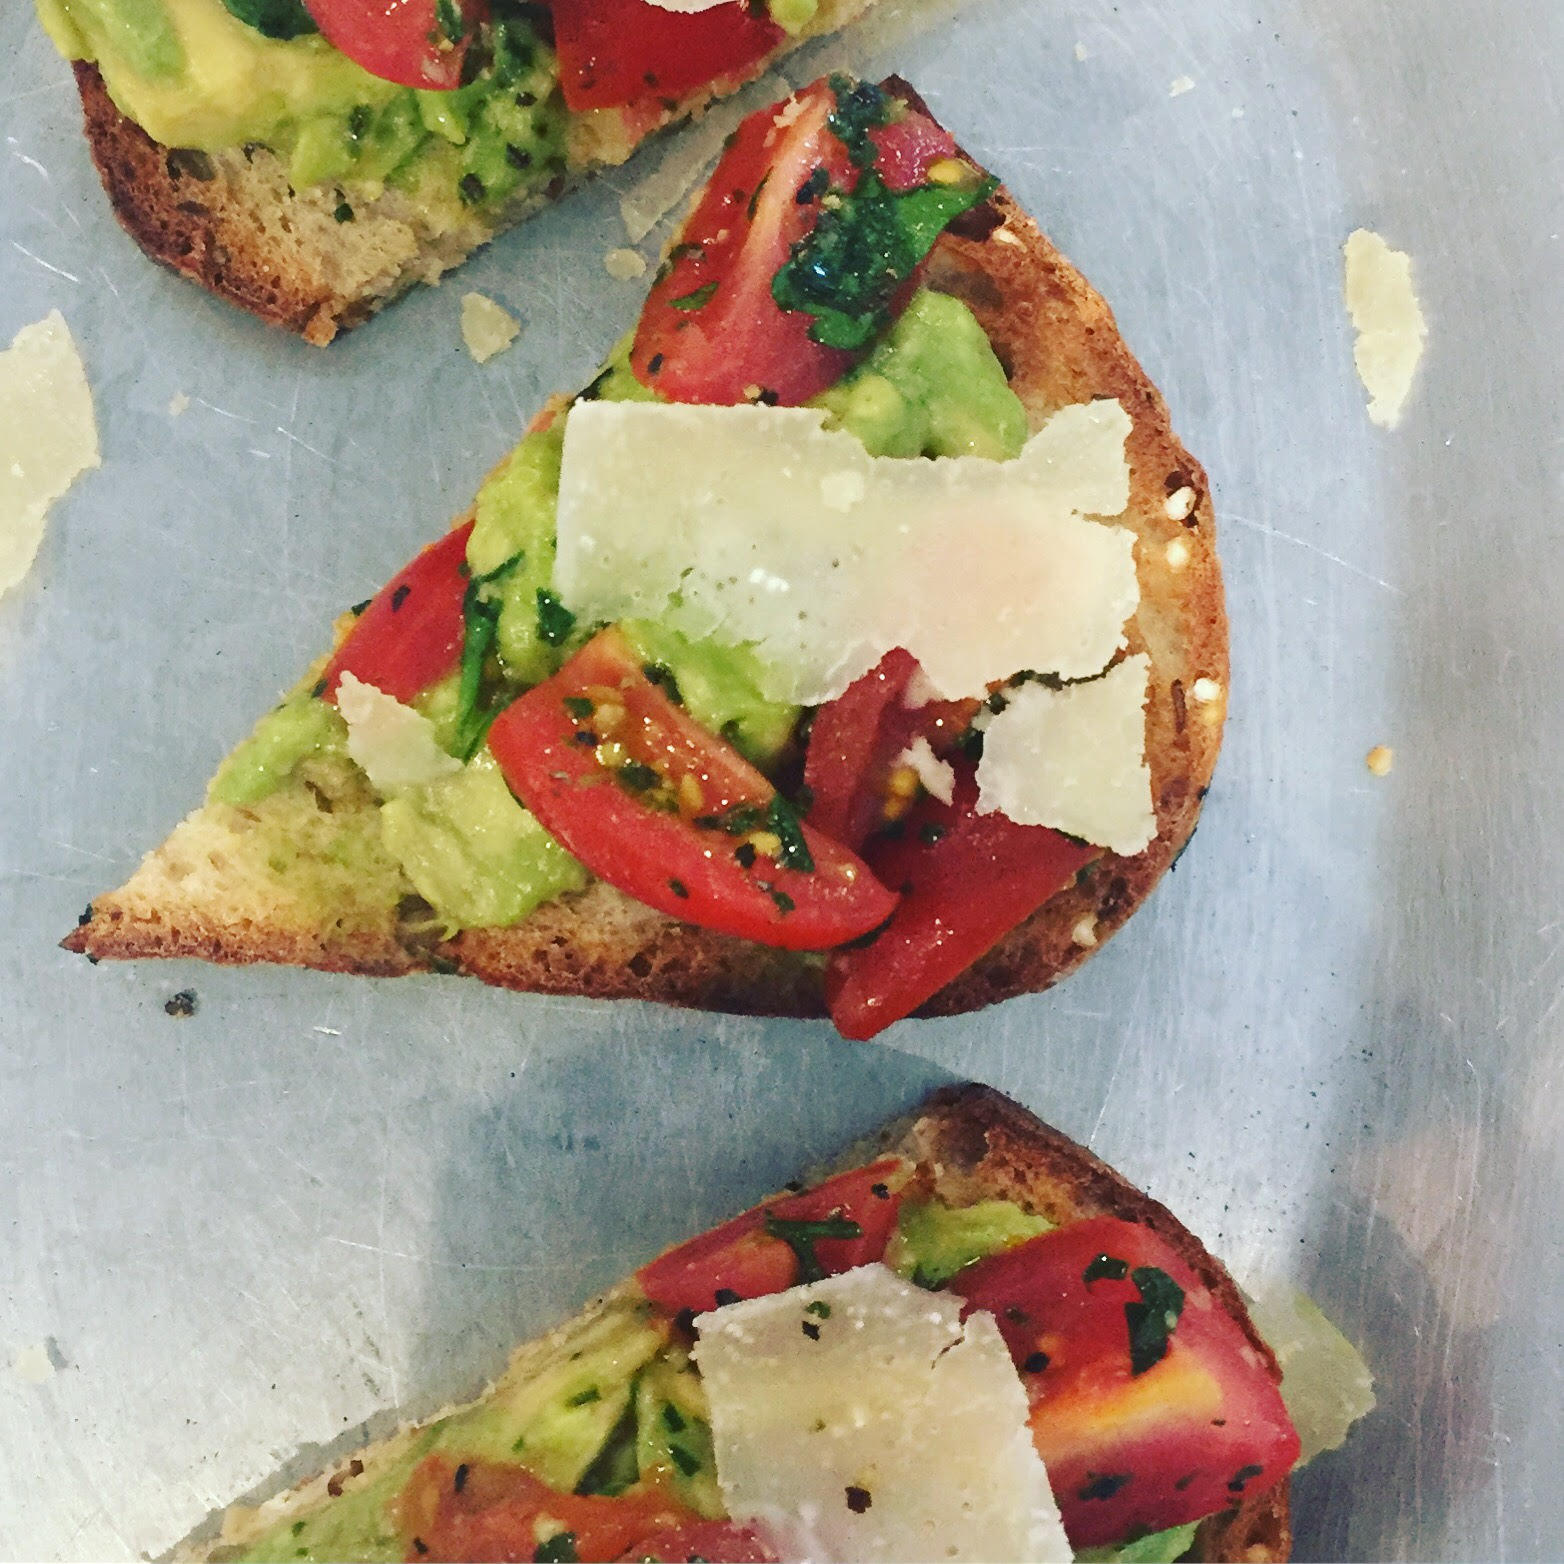 Avo toast, made with multi-grain toasted bread with freshly smashed avocado, marinated tomatoes and freshly-shaved parmesan. Photo courtesy of Haley Kirk